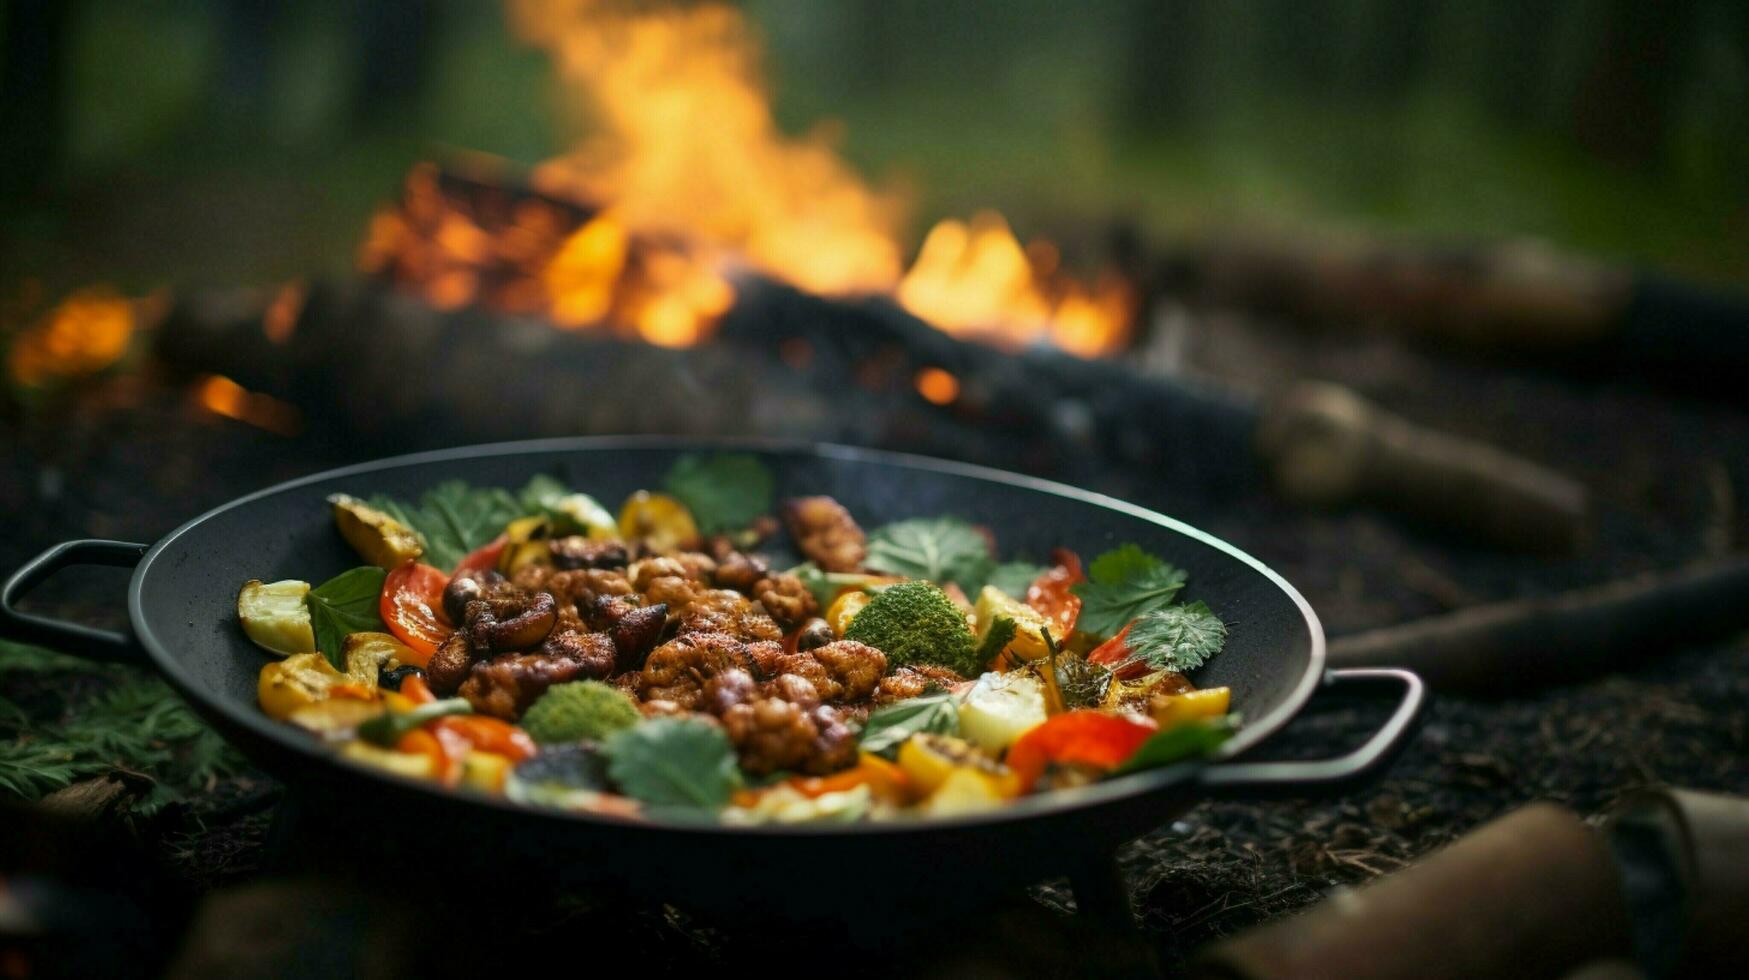 healthy vegetarian meal cooked outdoors on wood flame photo